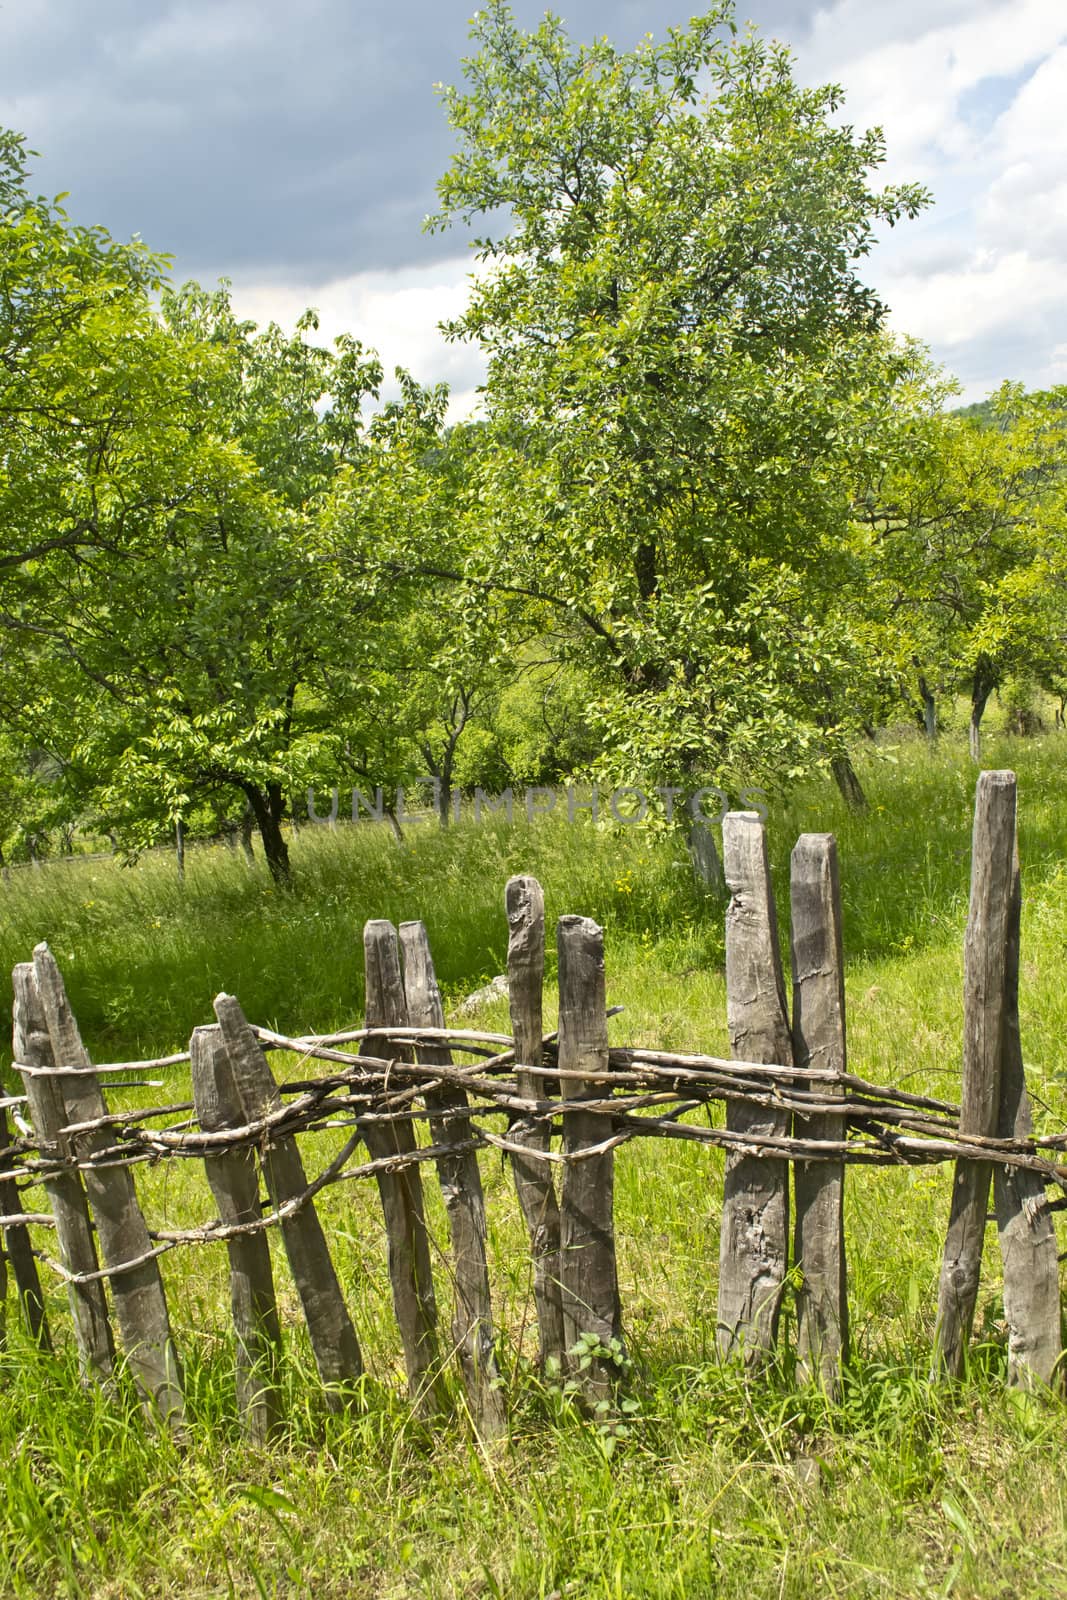 Old wooden fence in village with orchard behind